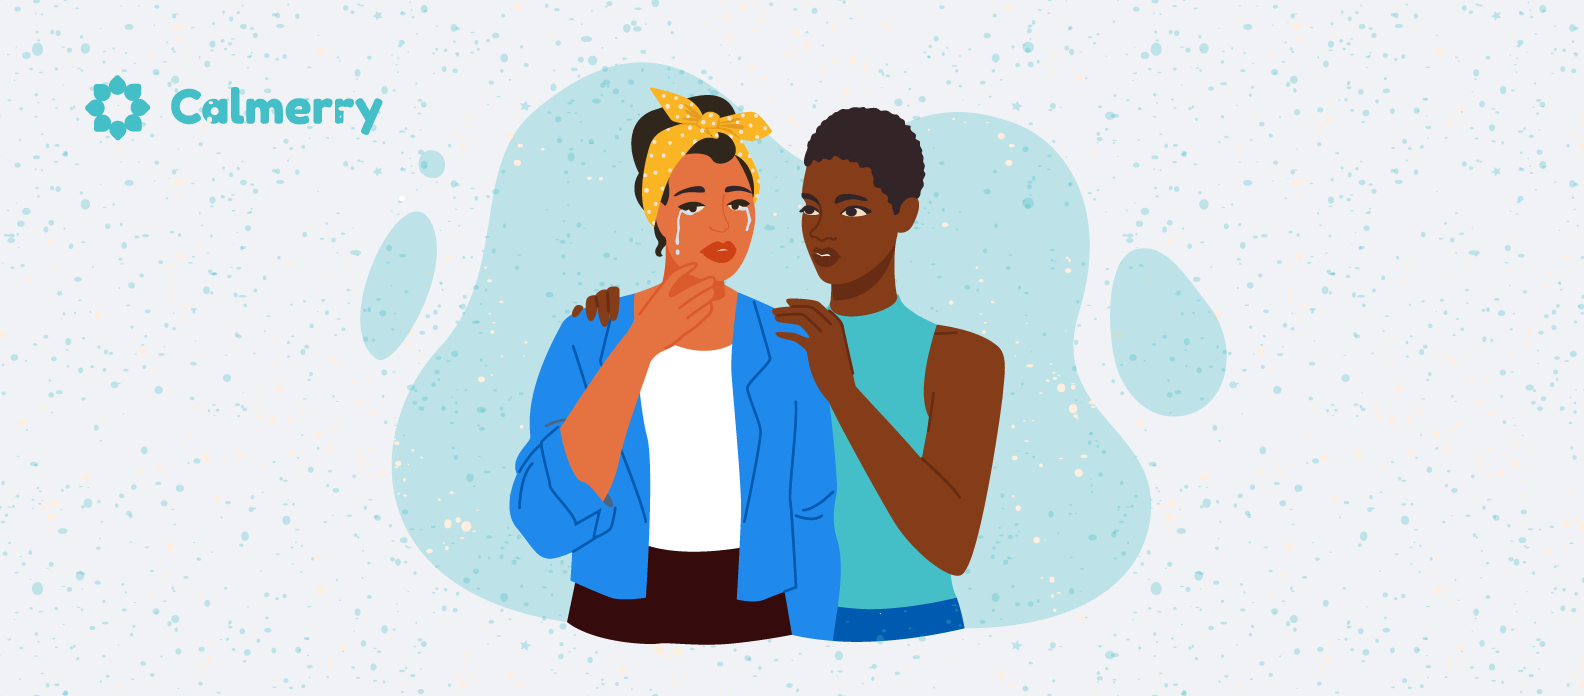 A black woman is getting concerned about the mental health of her friend